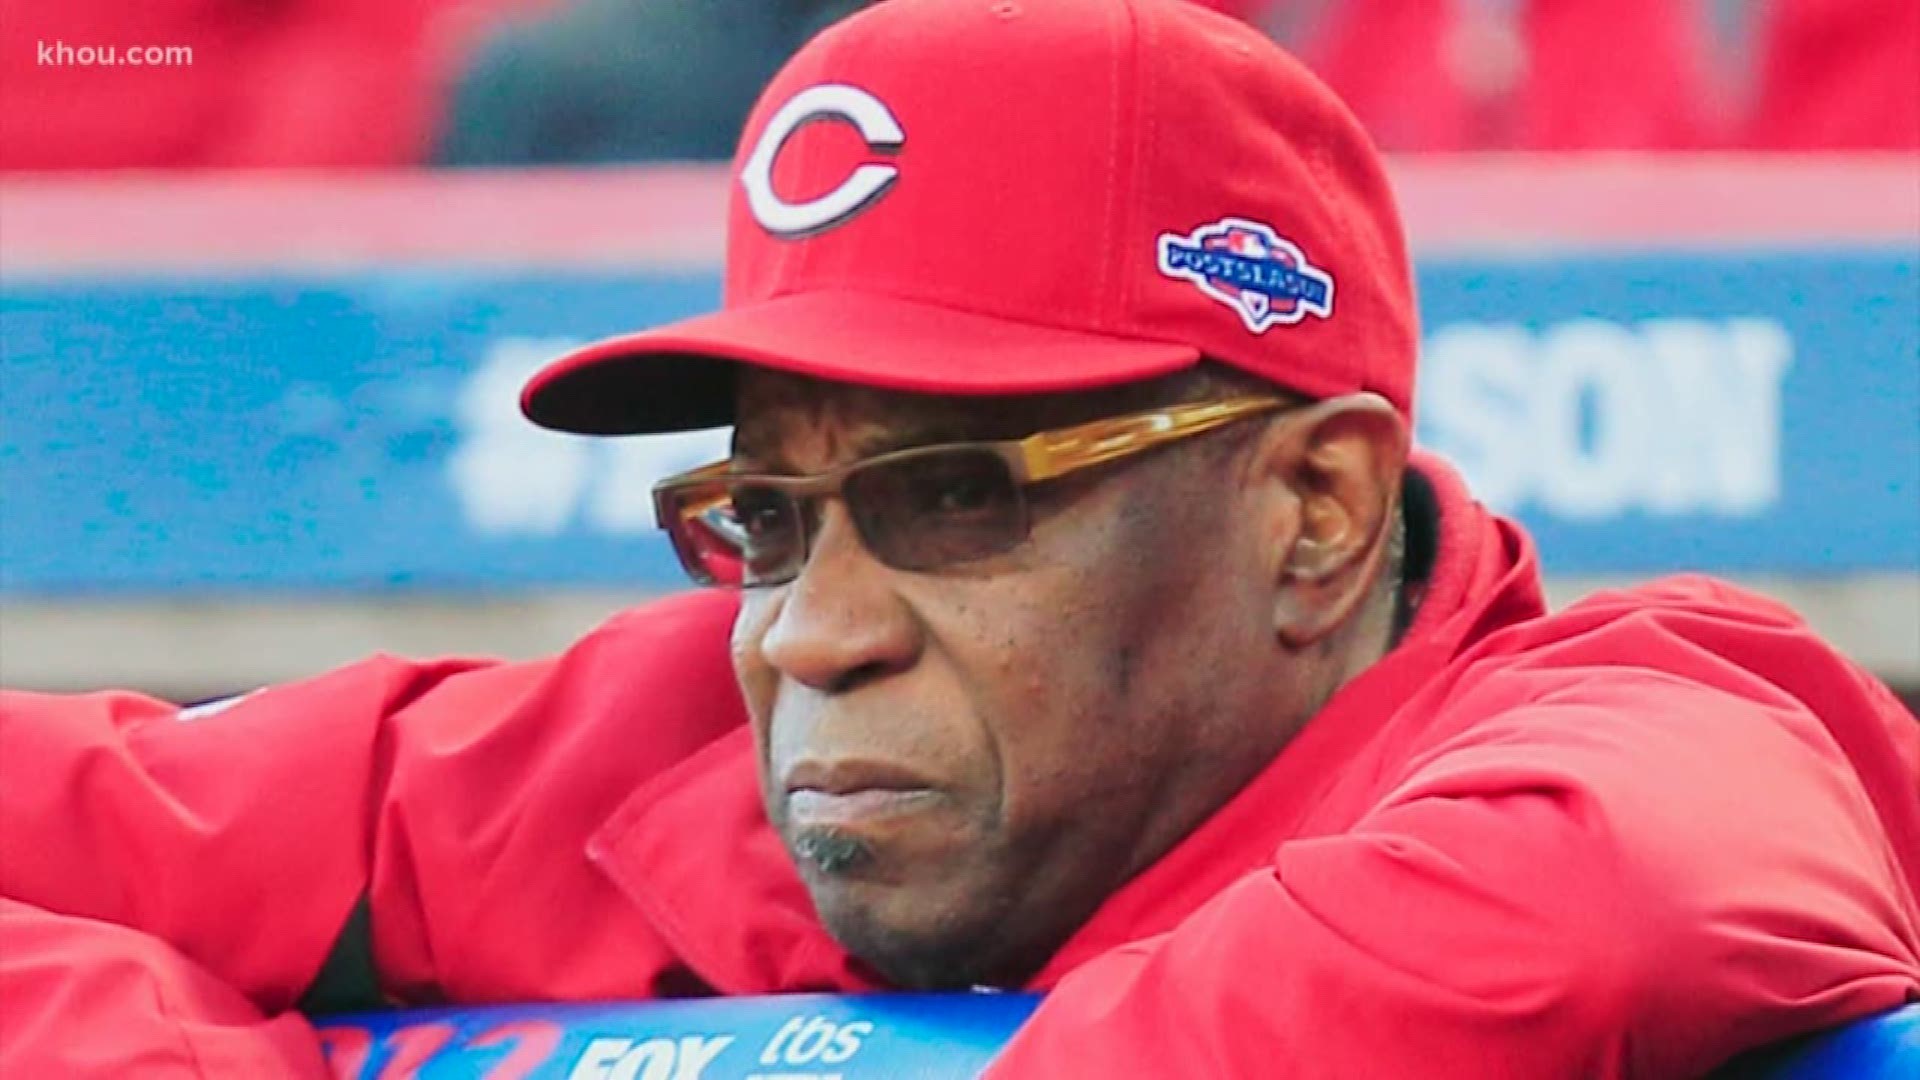 The Houston Astros have hired Dusty Baker as their new manager, owner and Jim Crane announced Wednesday.